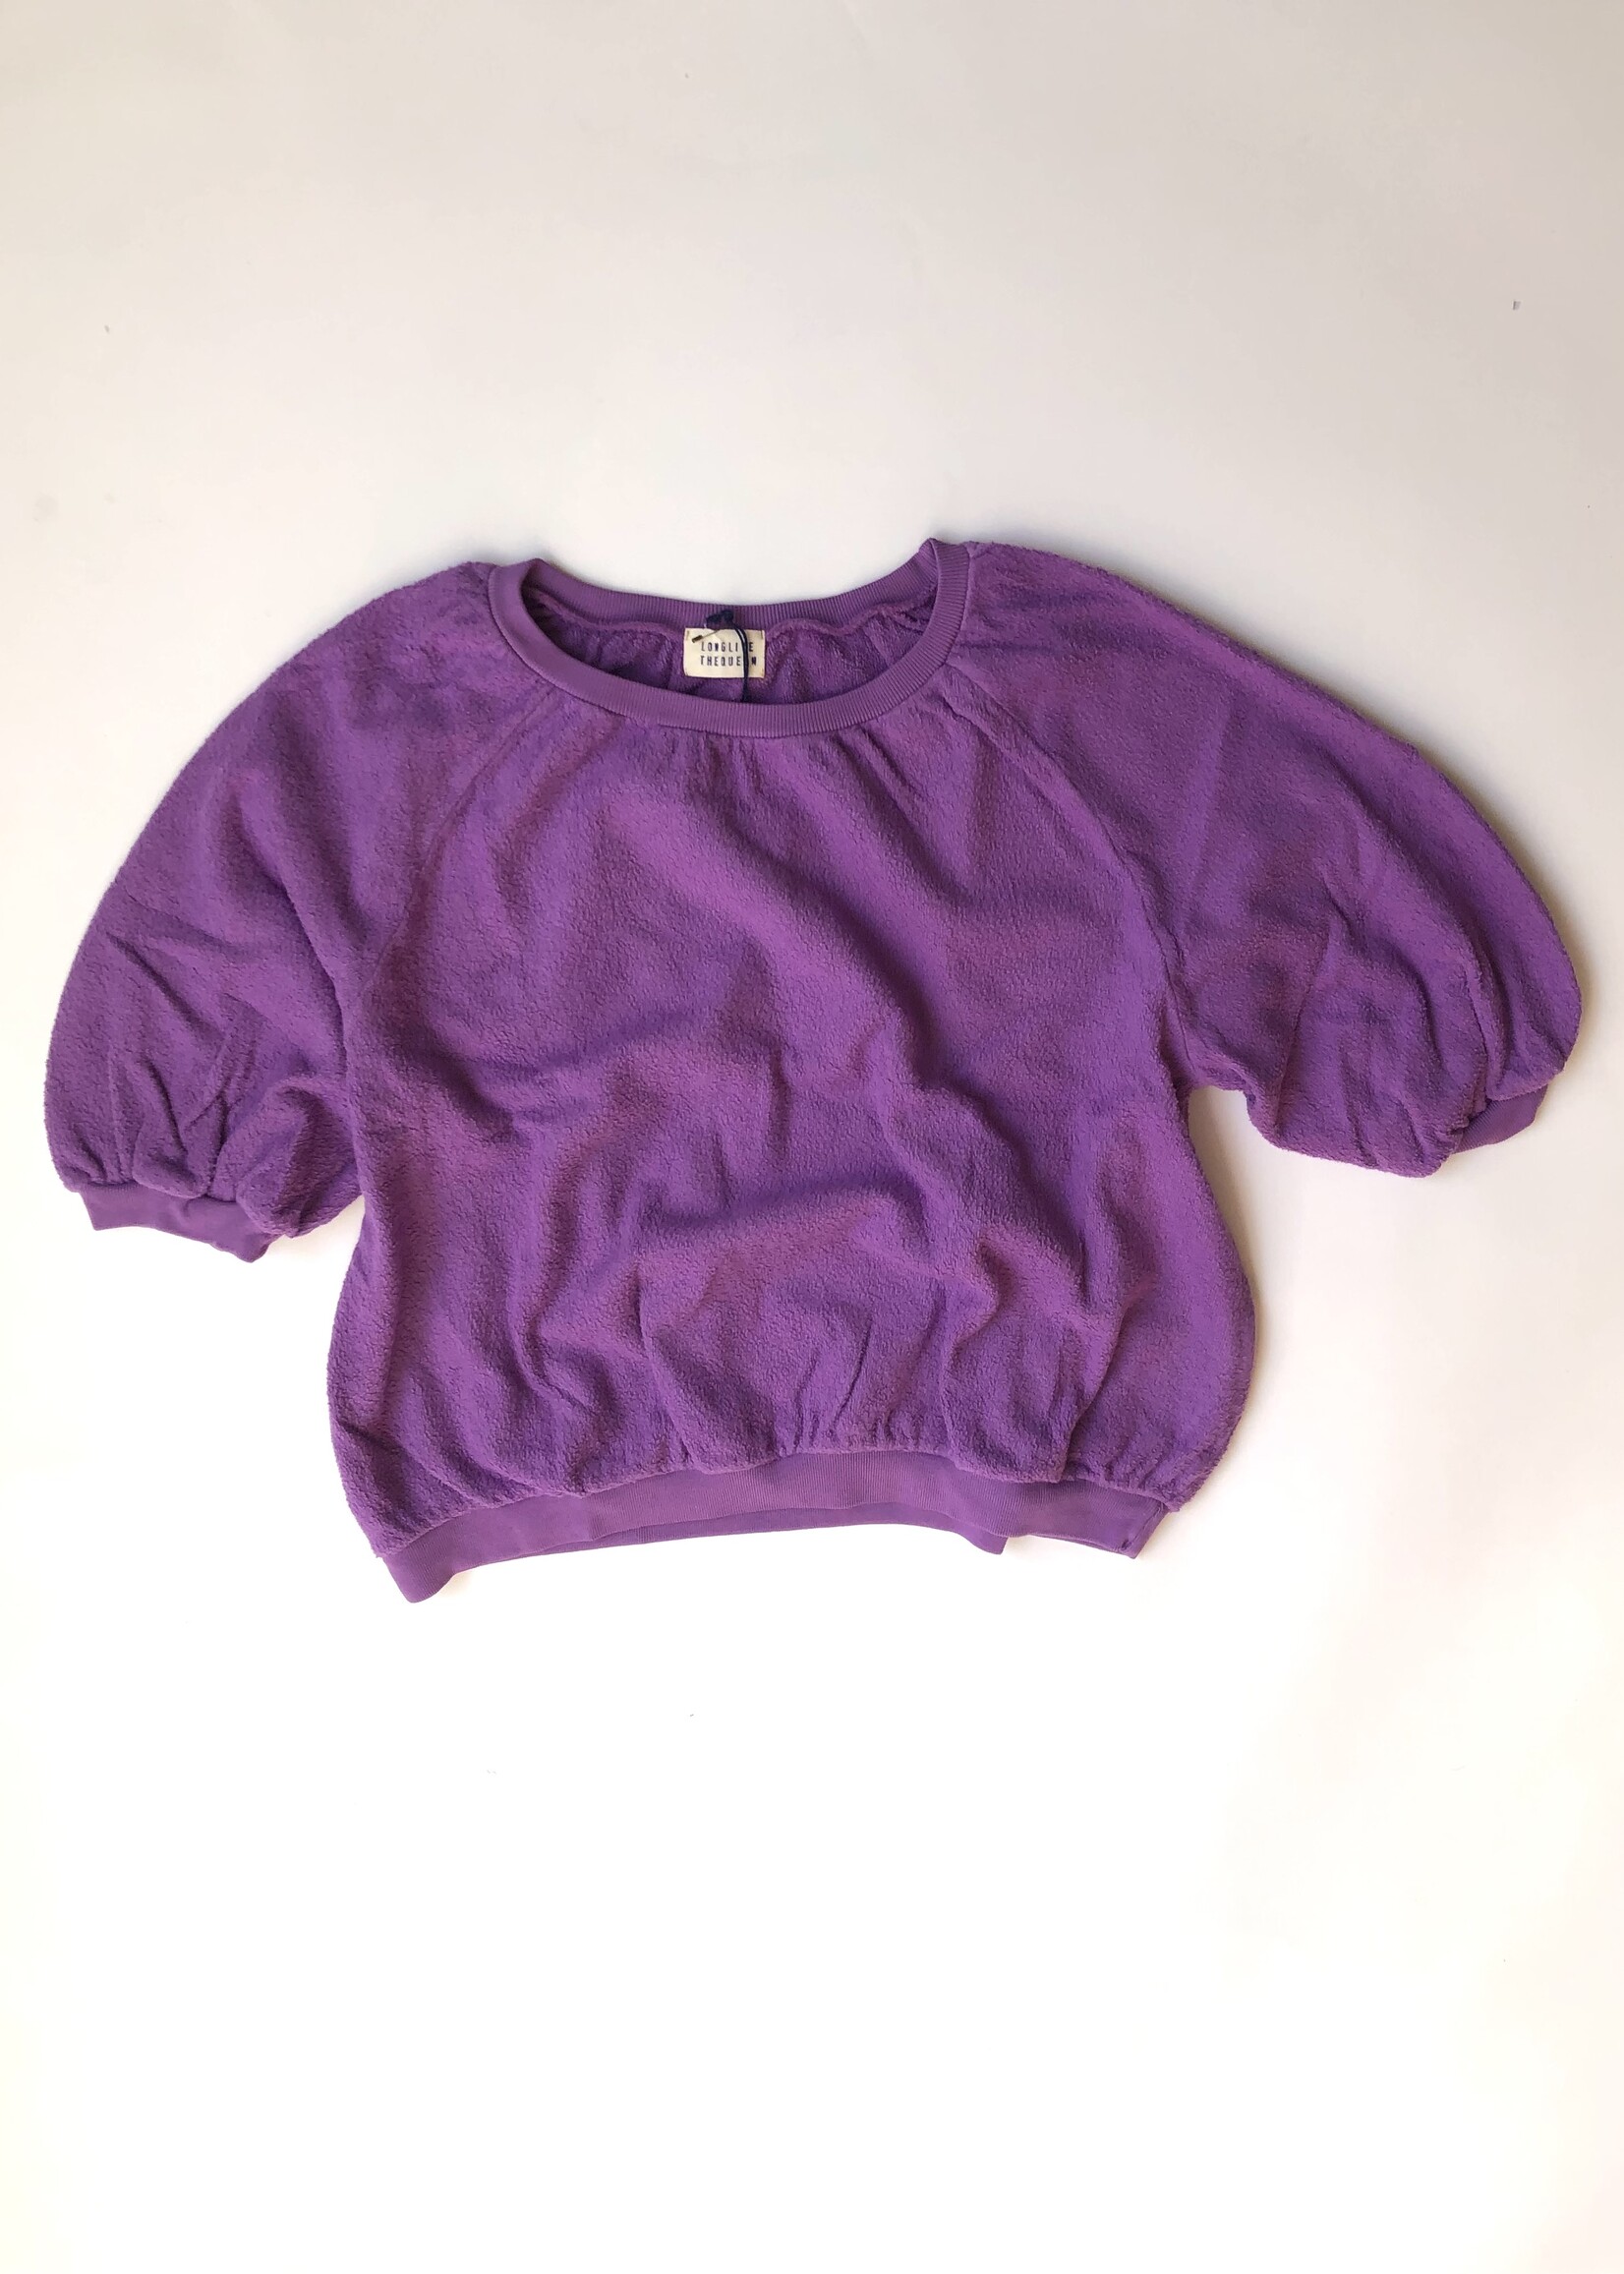 Long Live The Queen Purple sweater shirt 13-14y